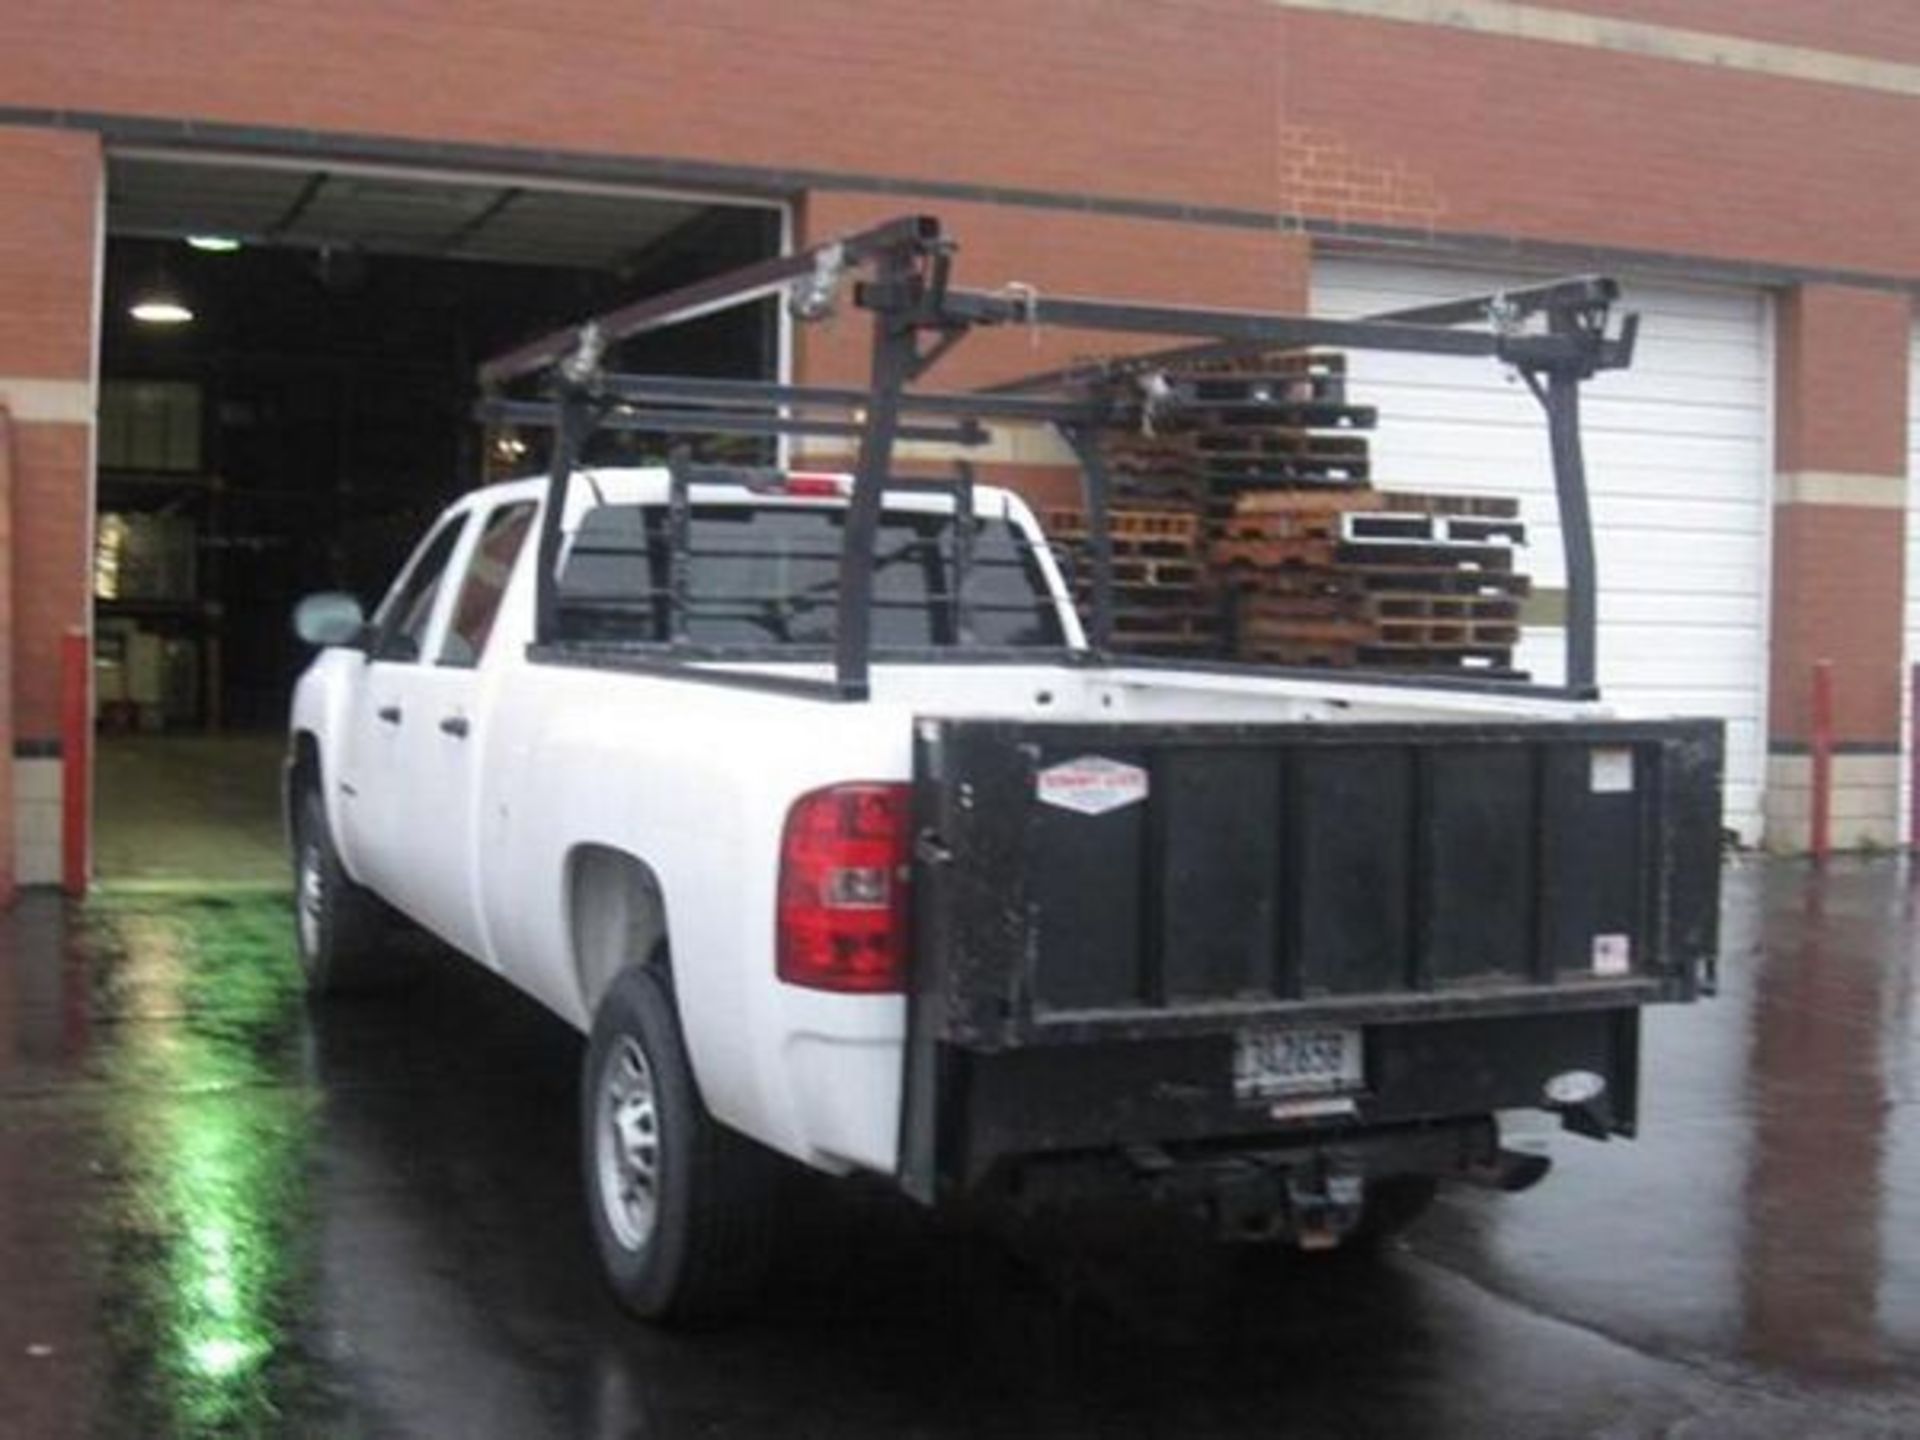 2014 Chevrolet Crew Cab Pick-up Truck, with Rack & Lift Gate, 2500 HD, VIN 1GC1CVCG3EF109011, 32,799 - Image 4 of 12